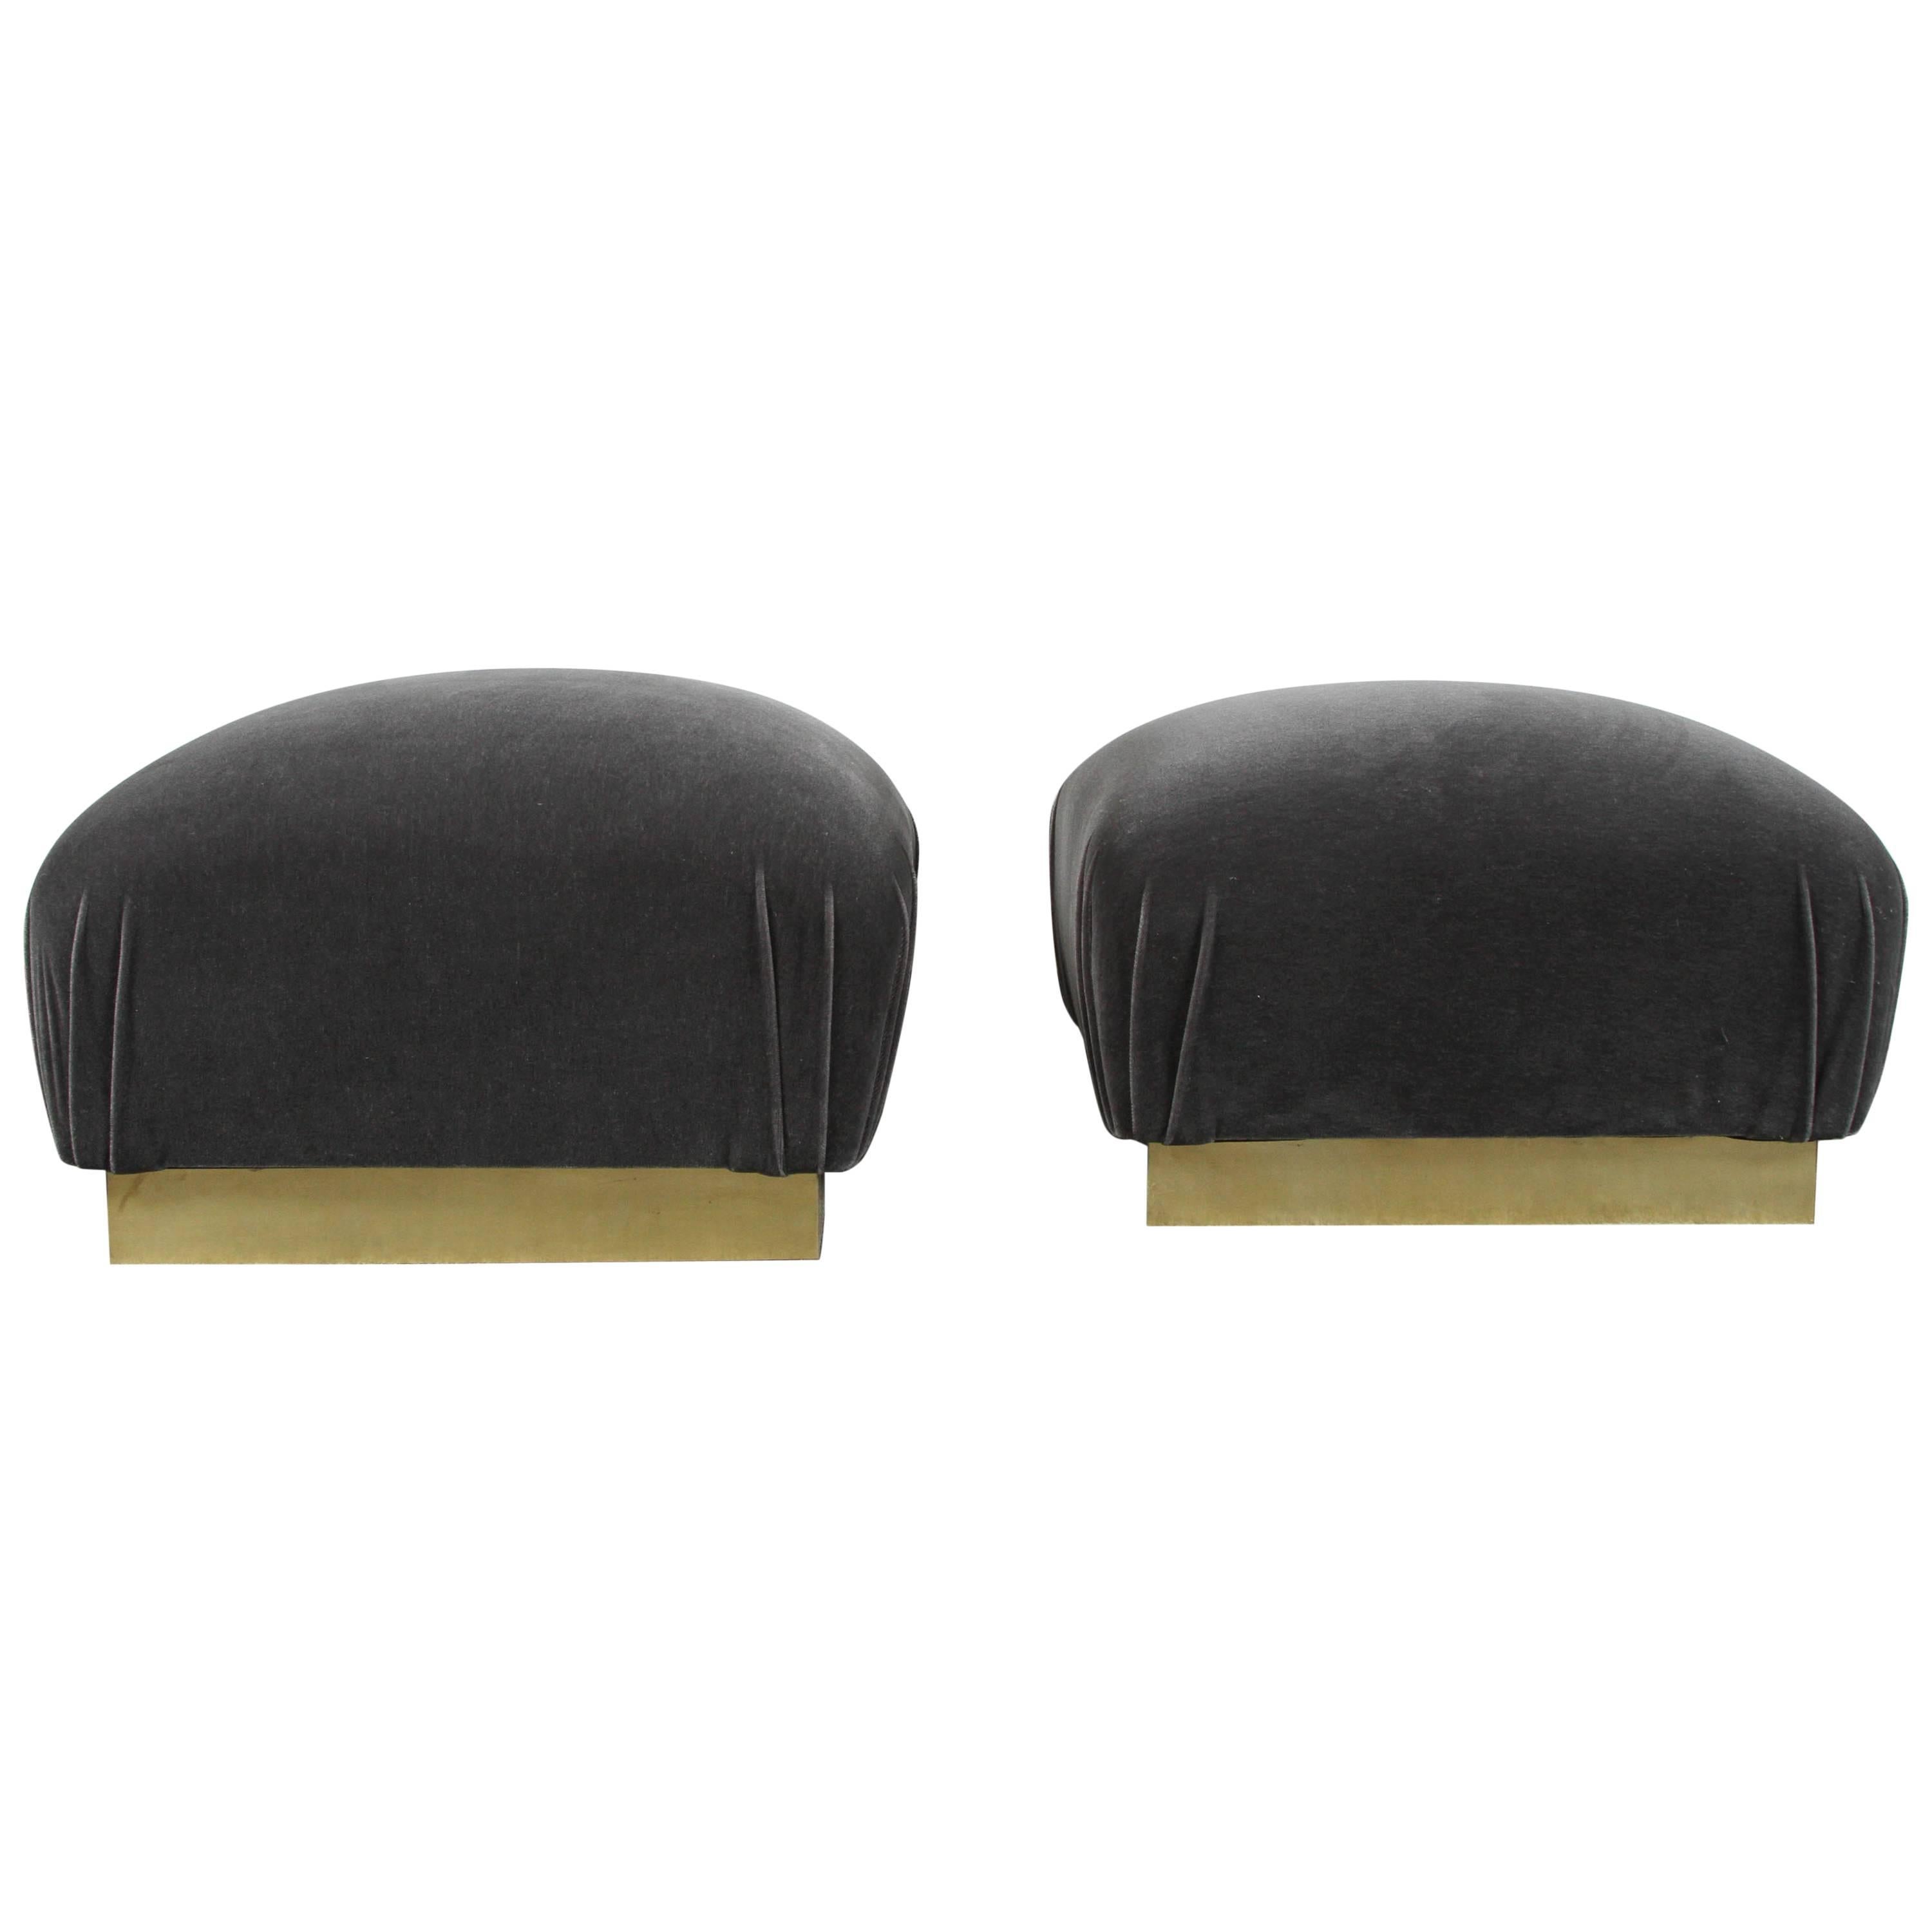 Pair of Pouf Ottomans by Steve Chase